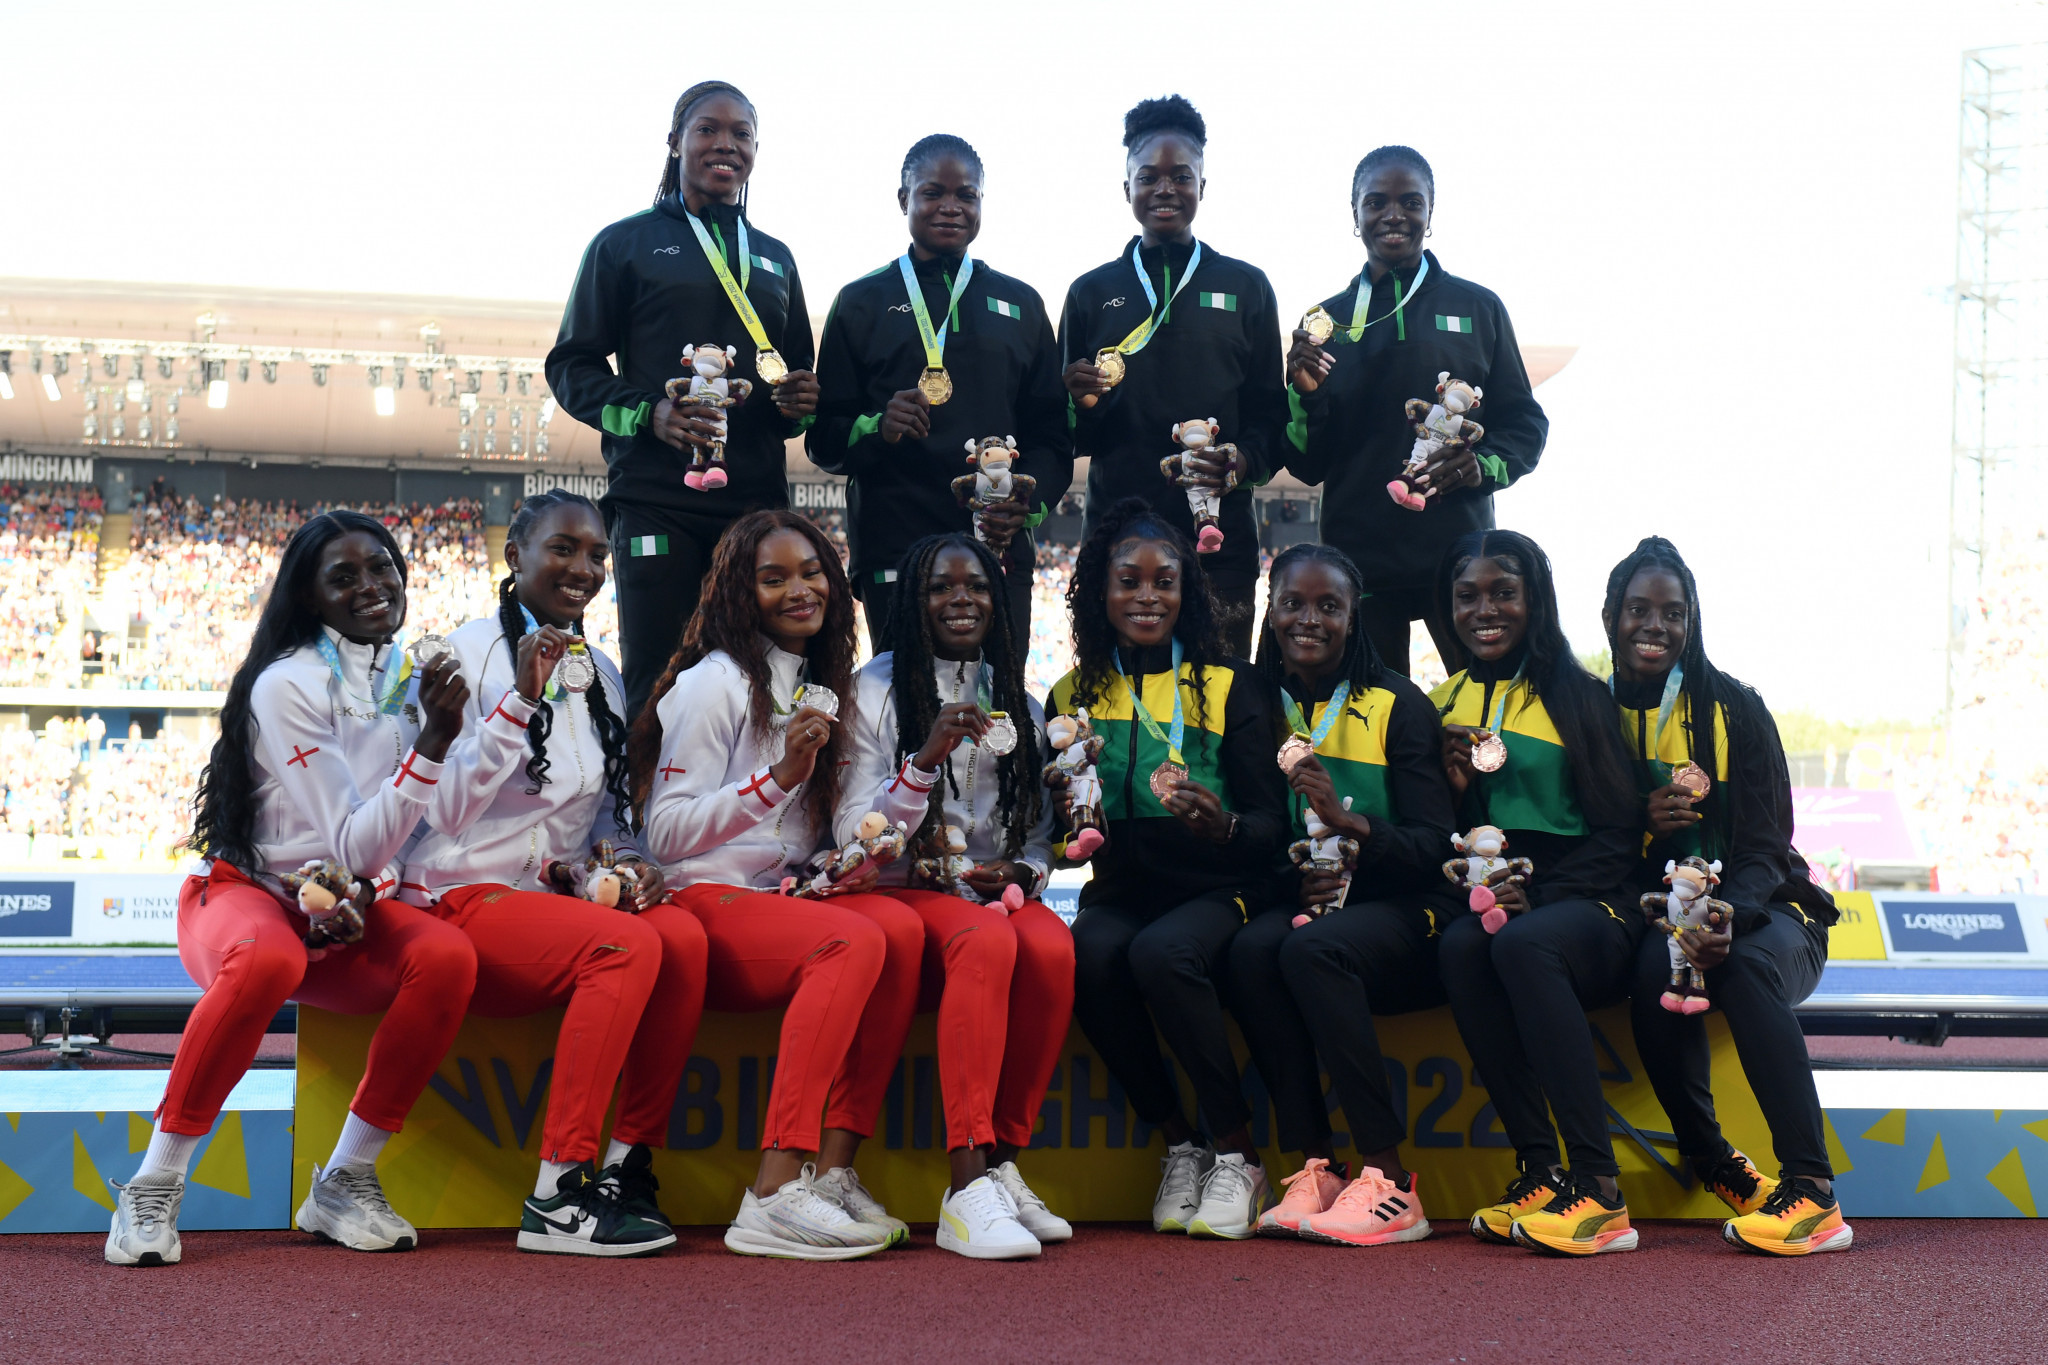 Nigeria's disqualification means that Jamaica are promoted to the silver medal and Australia move from fourth to bronze ©Getty Images